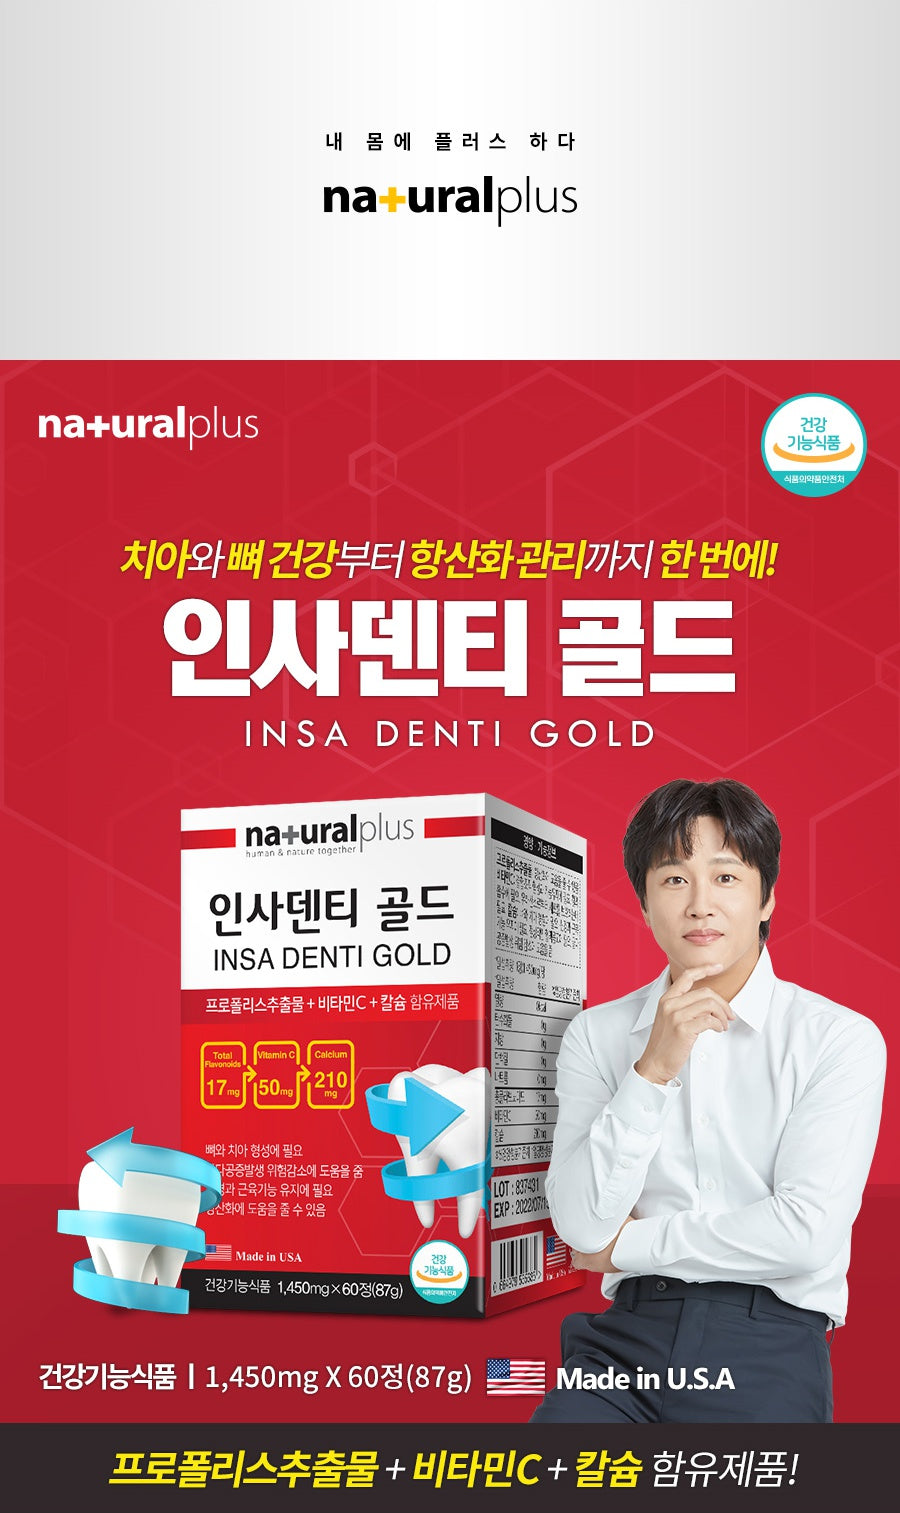 6 Boxes Naturalplus Insa Denti Gold 1450mg x 60 Tablets Dental care Health Supplements Oral iron antioxidant Supplements Bones Teeth muscle blood clotting osteoporosis Tooth